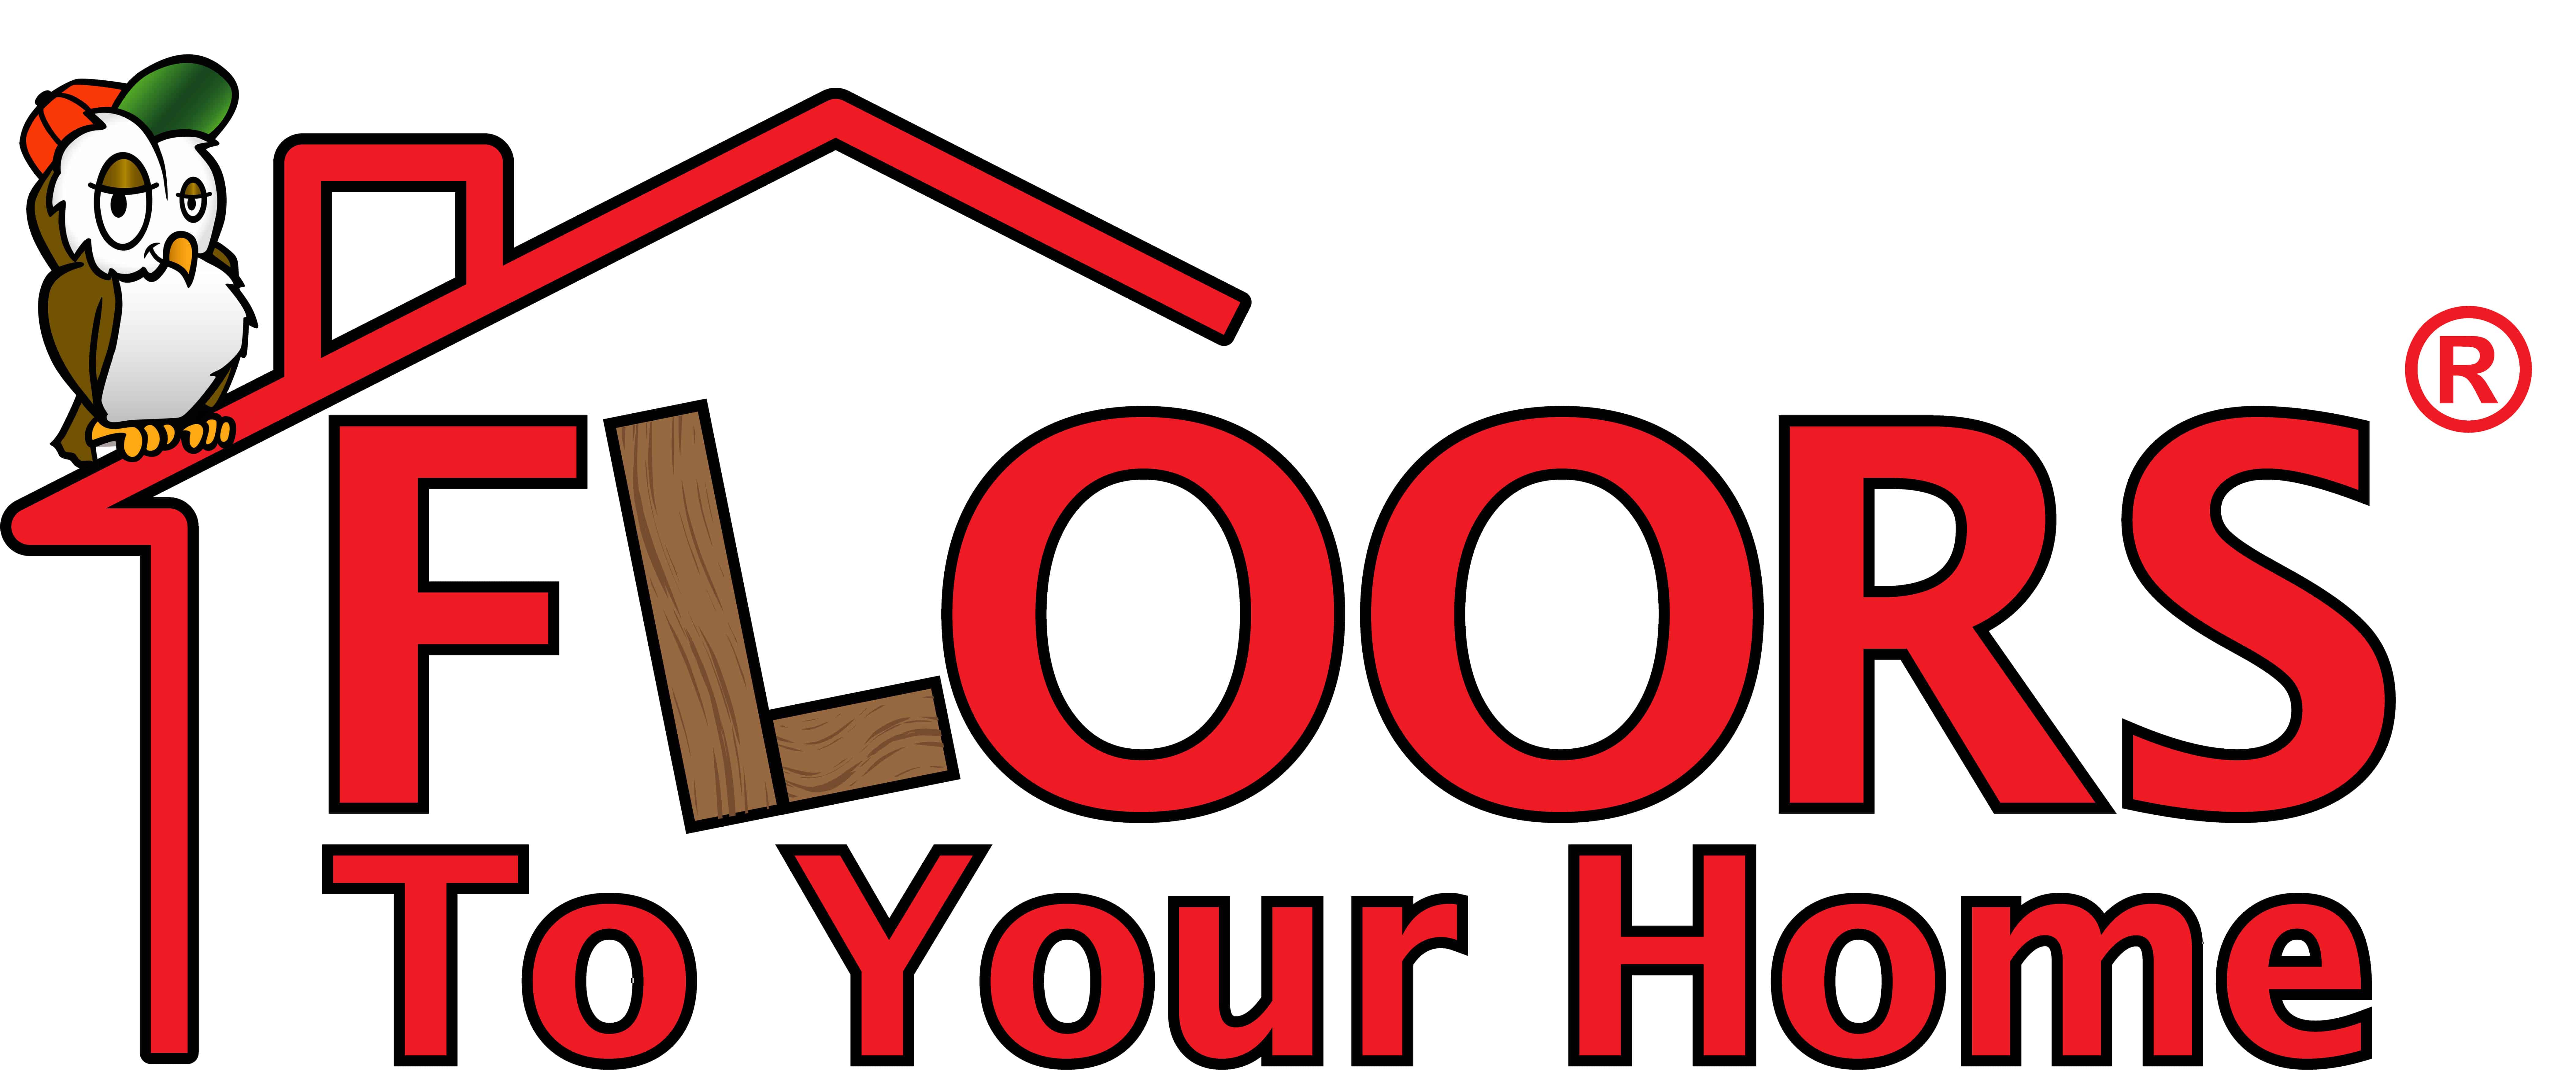 Floors to Your Home logo